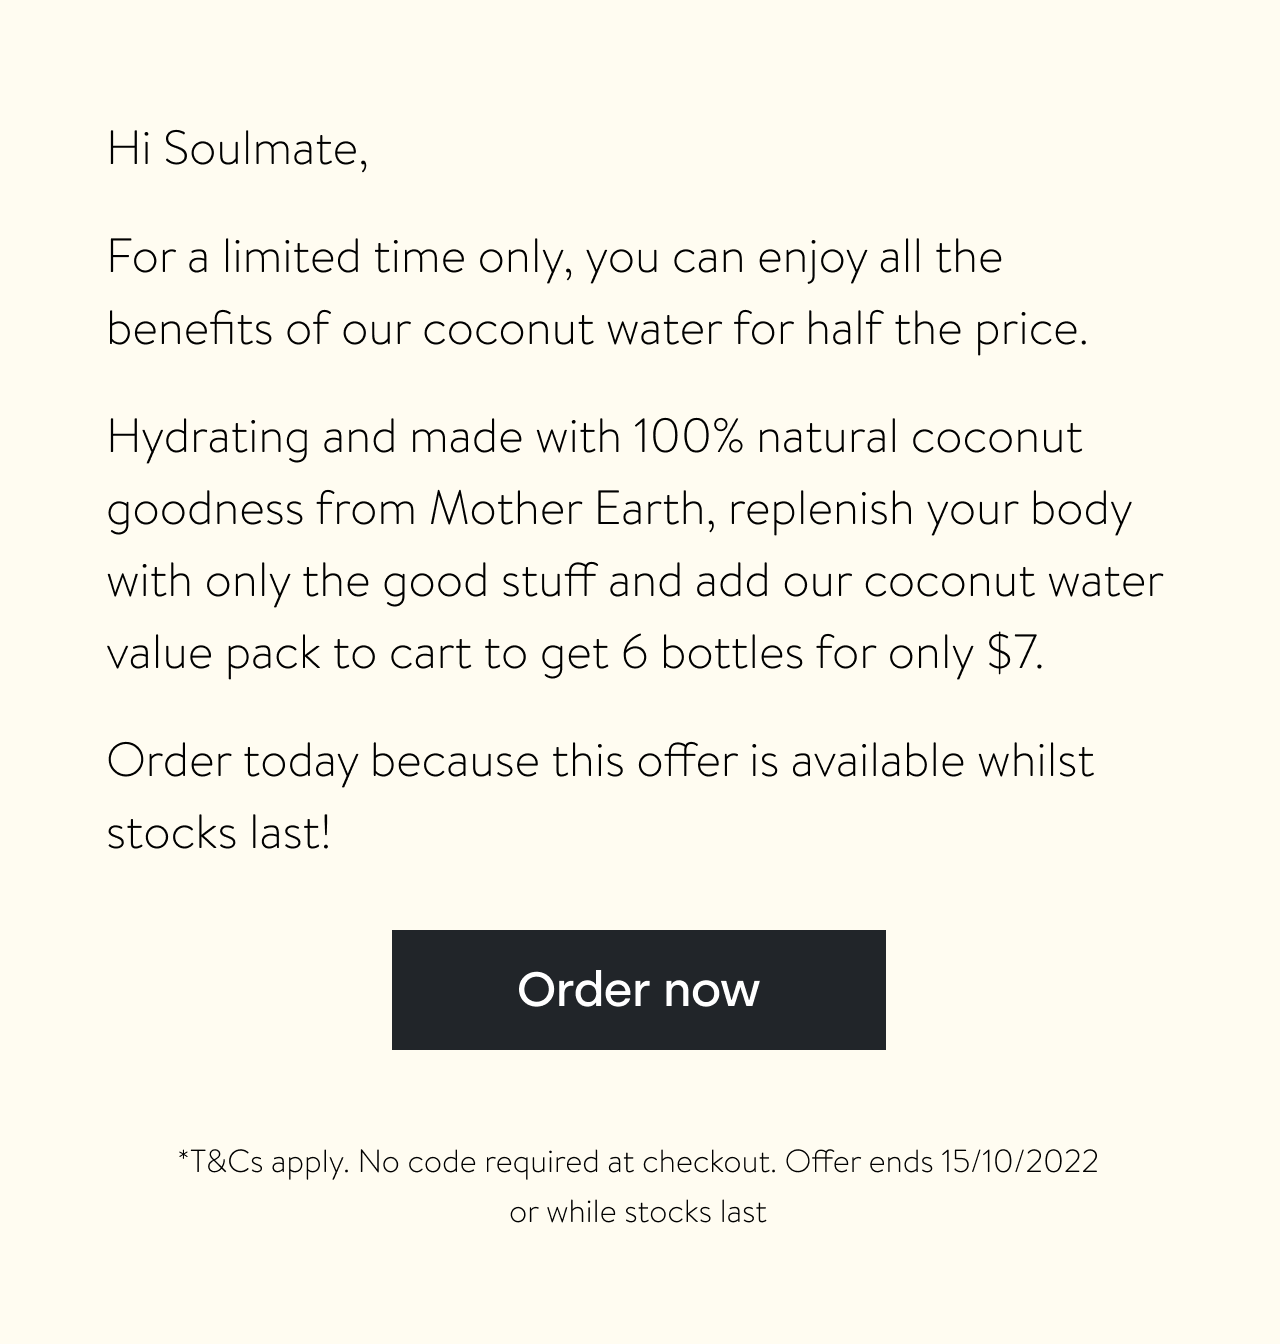 Add our coconut water value pack to cart to get 6 bottles for only $7